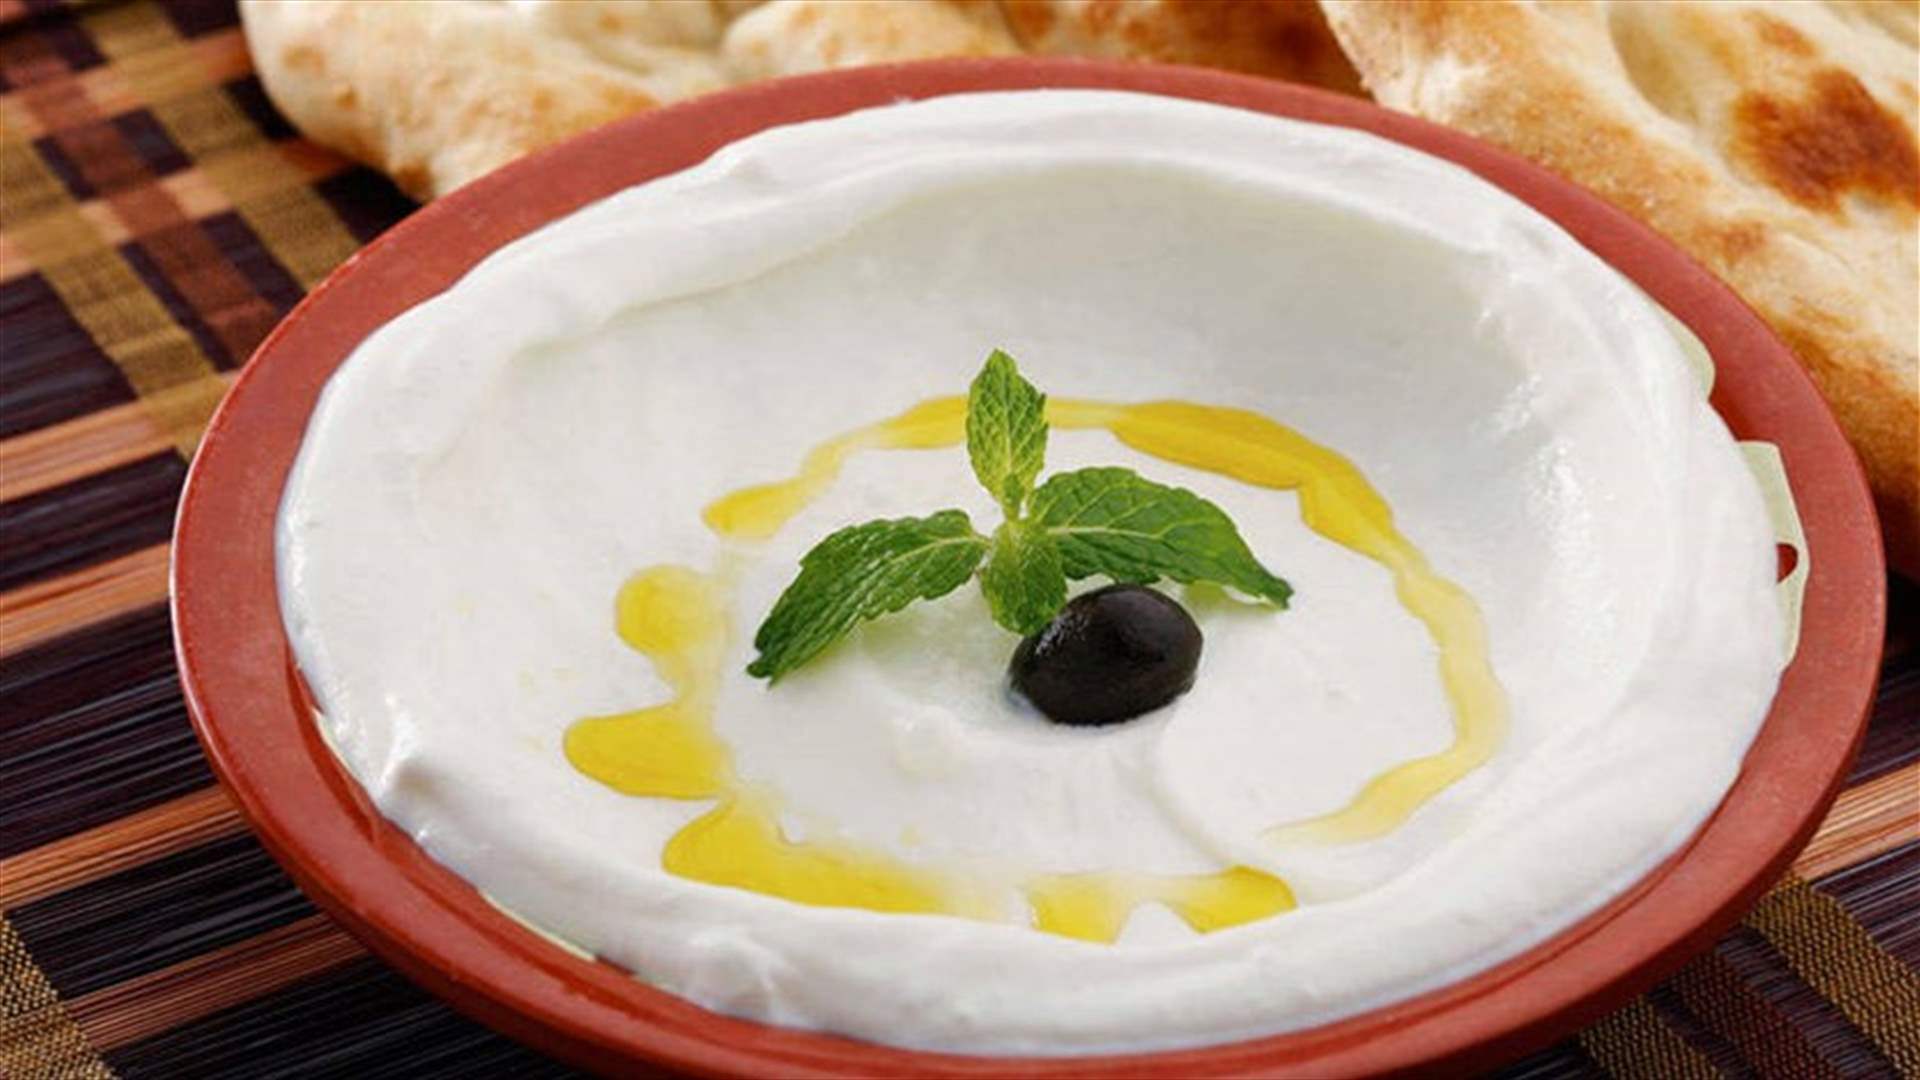 Labneh scandal: Investigations uncover non-compliant dairy products in Lebanon